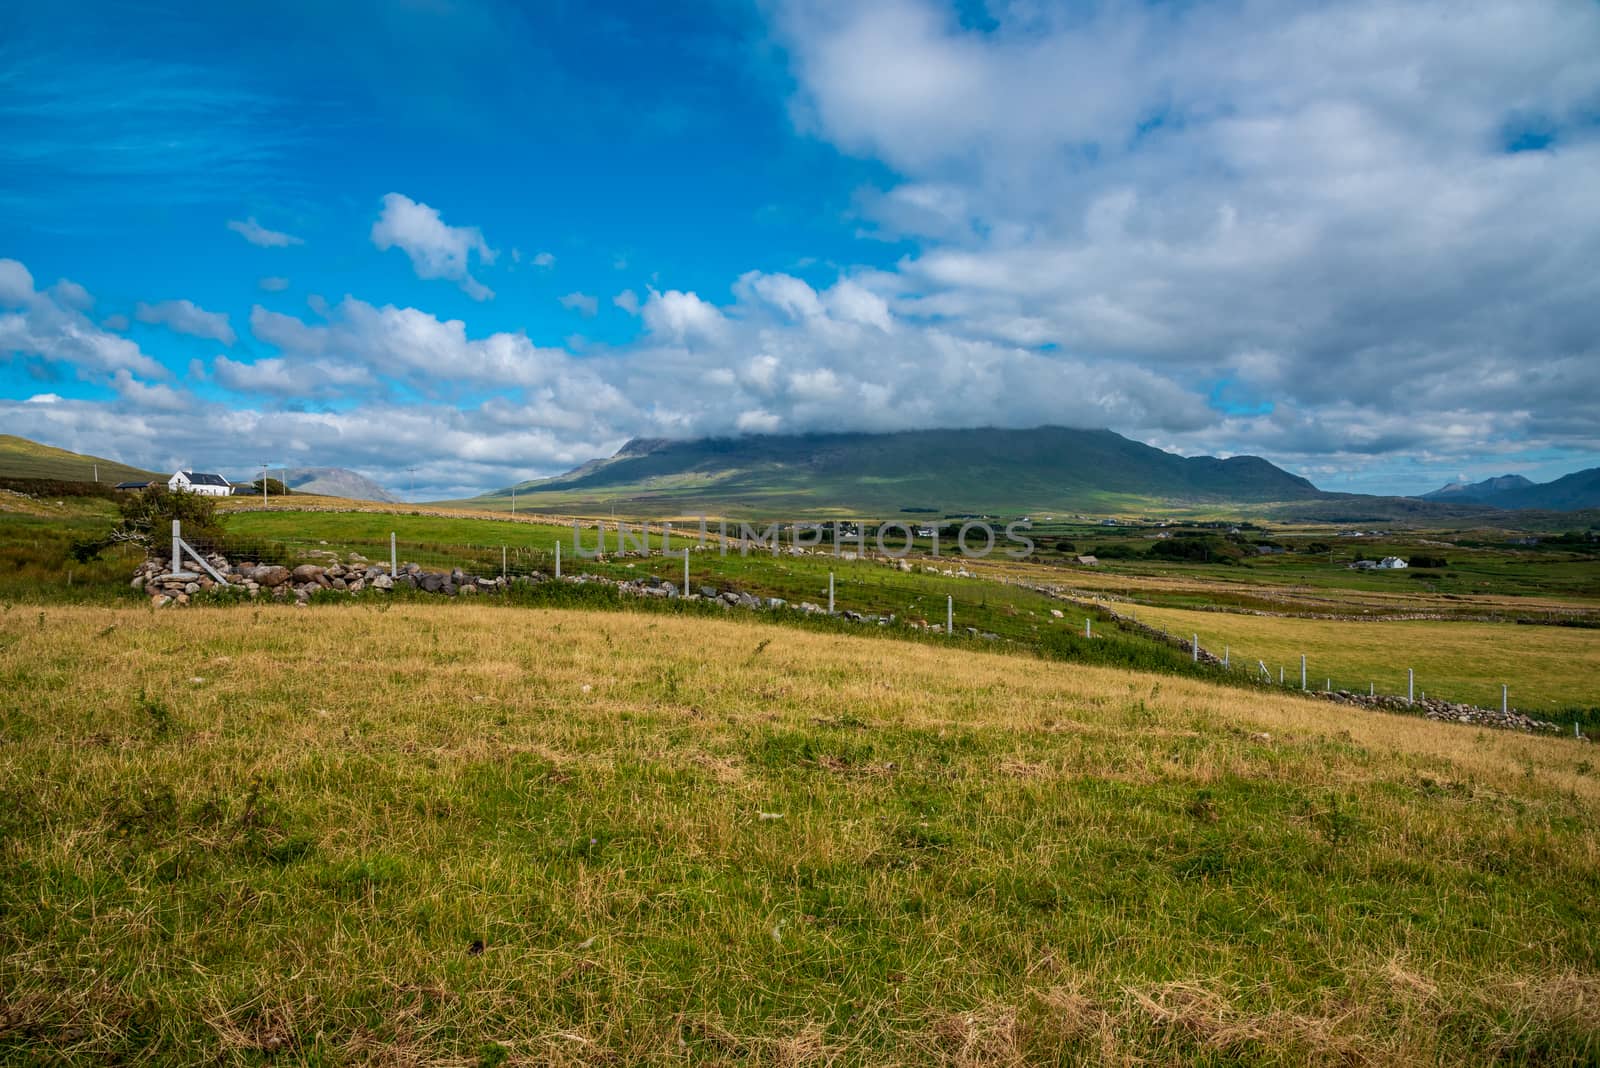 Wide angle landscape photo of the rolling hills and valleys of County Mayo, Ireland near the coast.